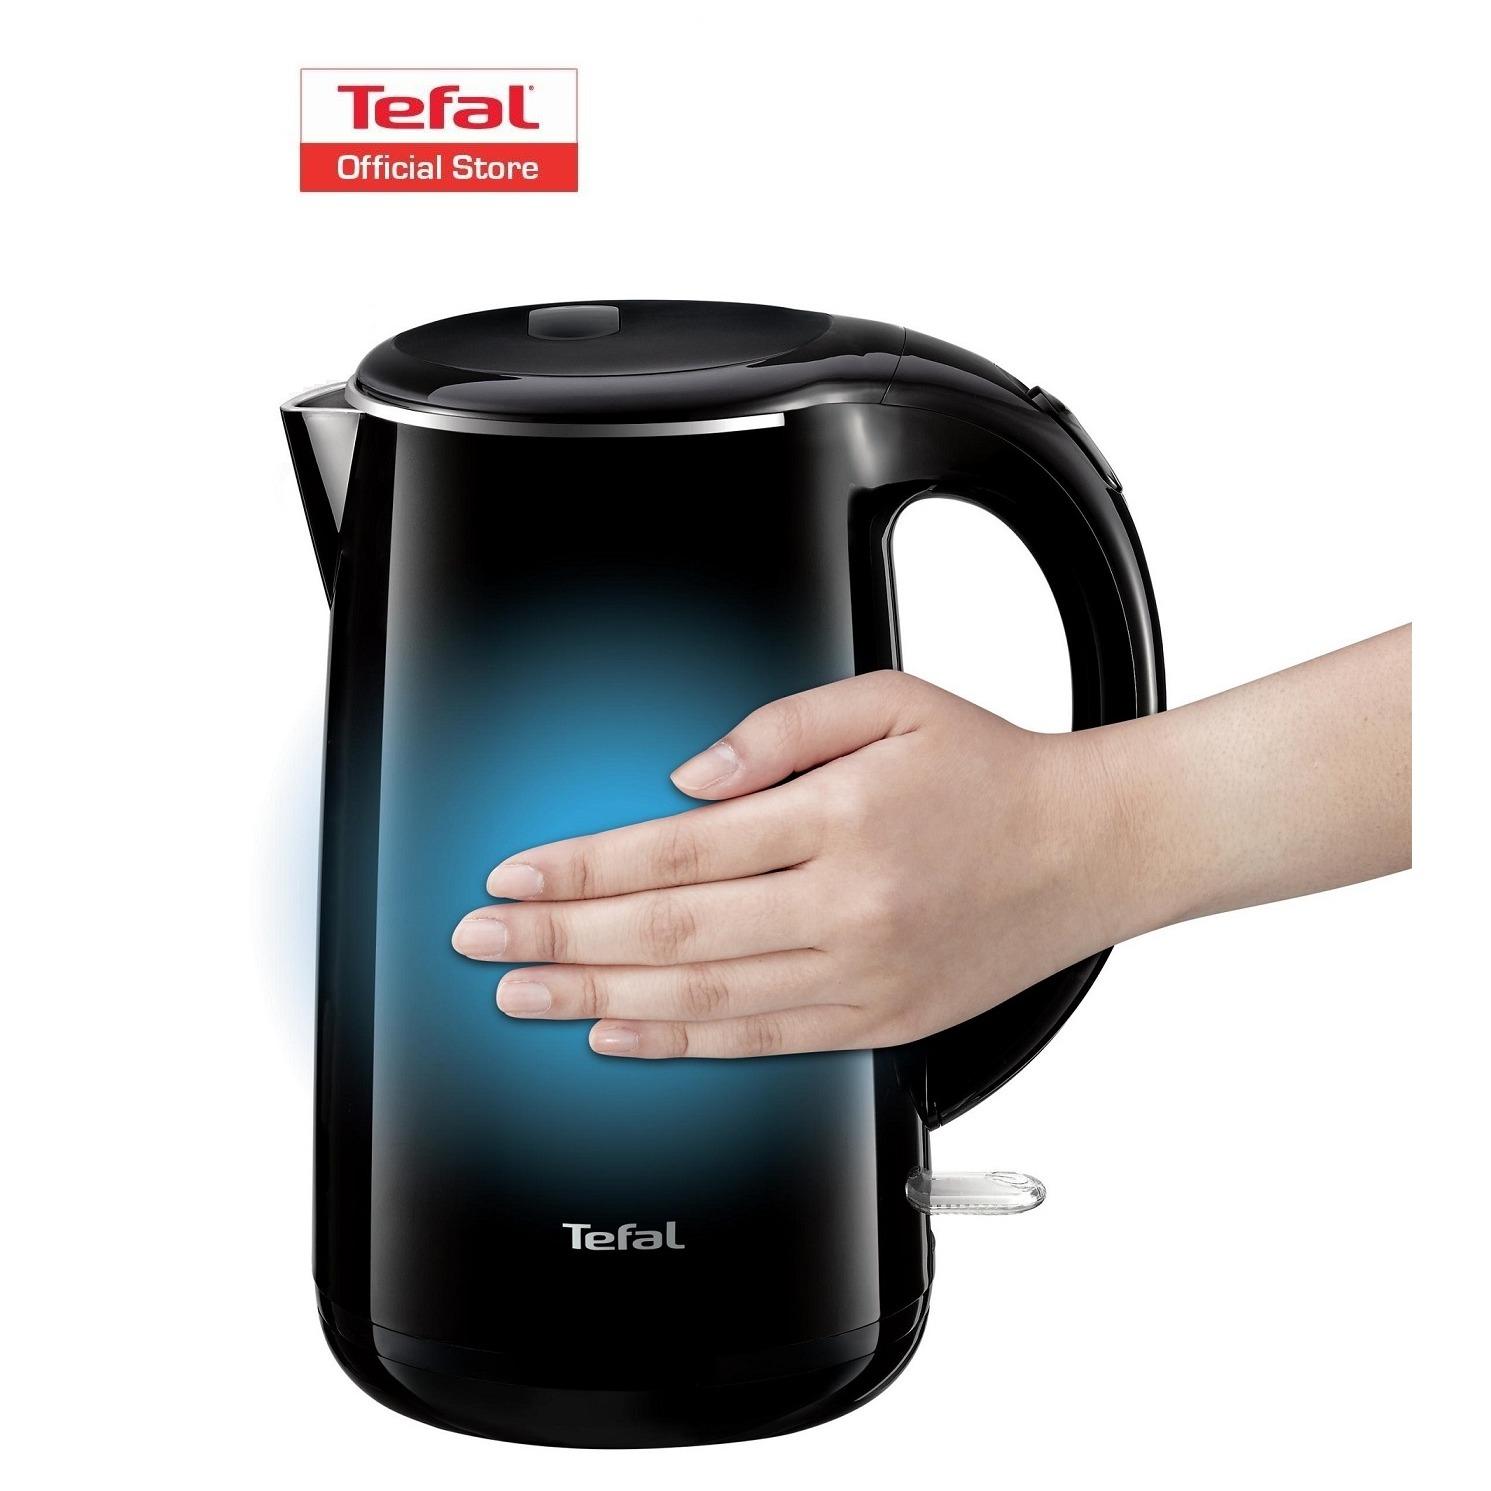 instructions for tefal automatic rice cooker